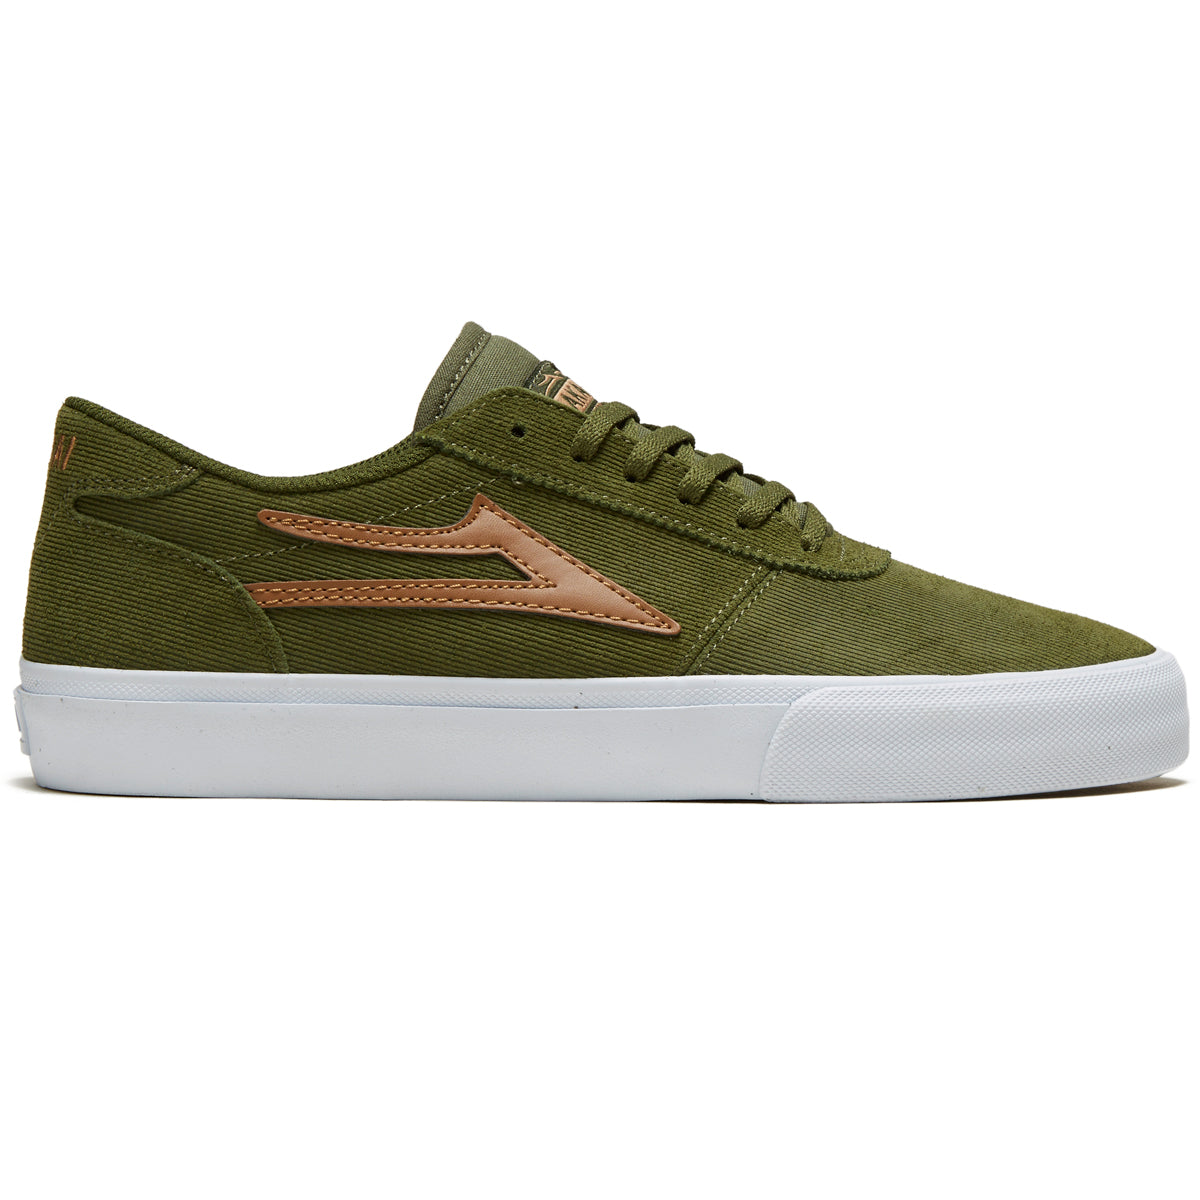 Lakai Manchester Shoes - Olive Cord Suede image 1